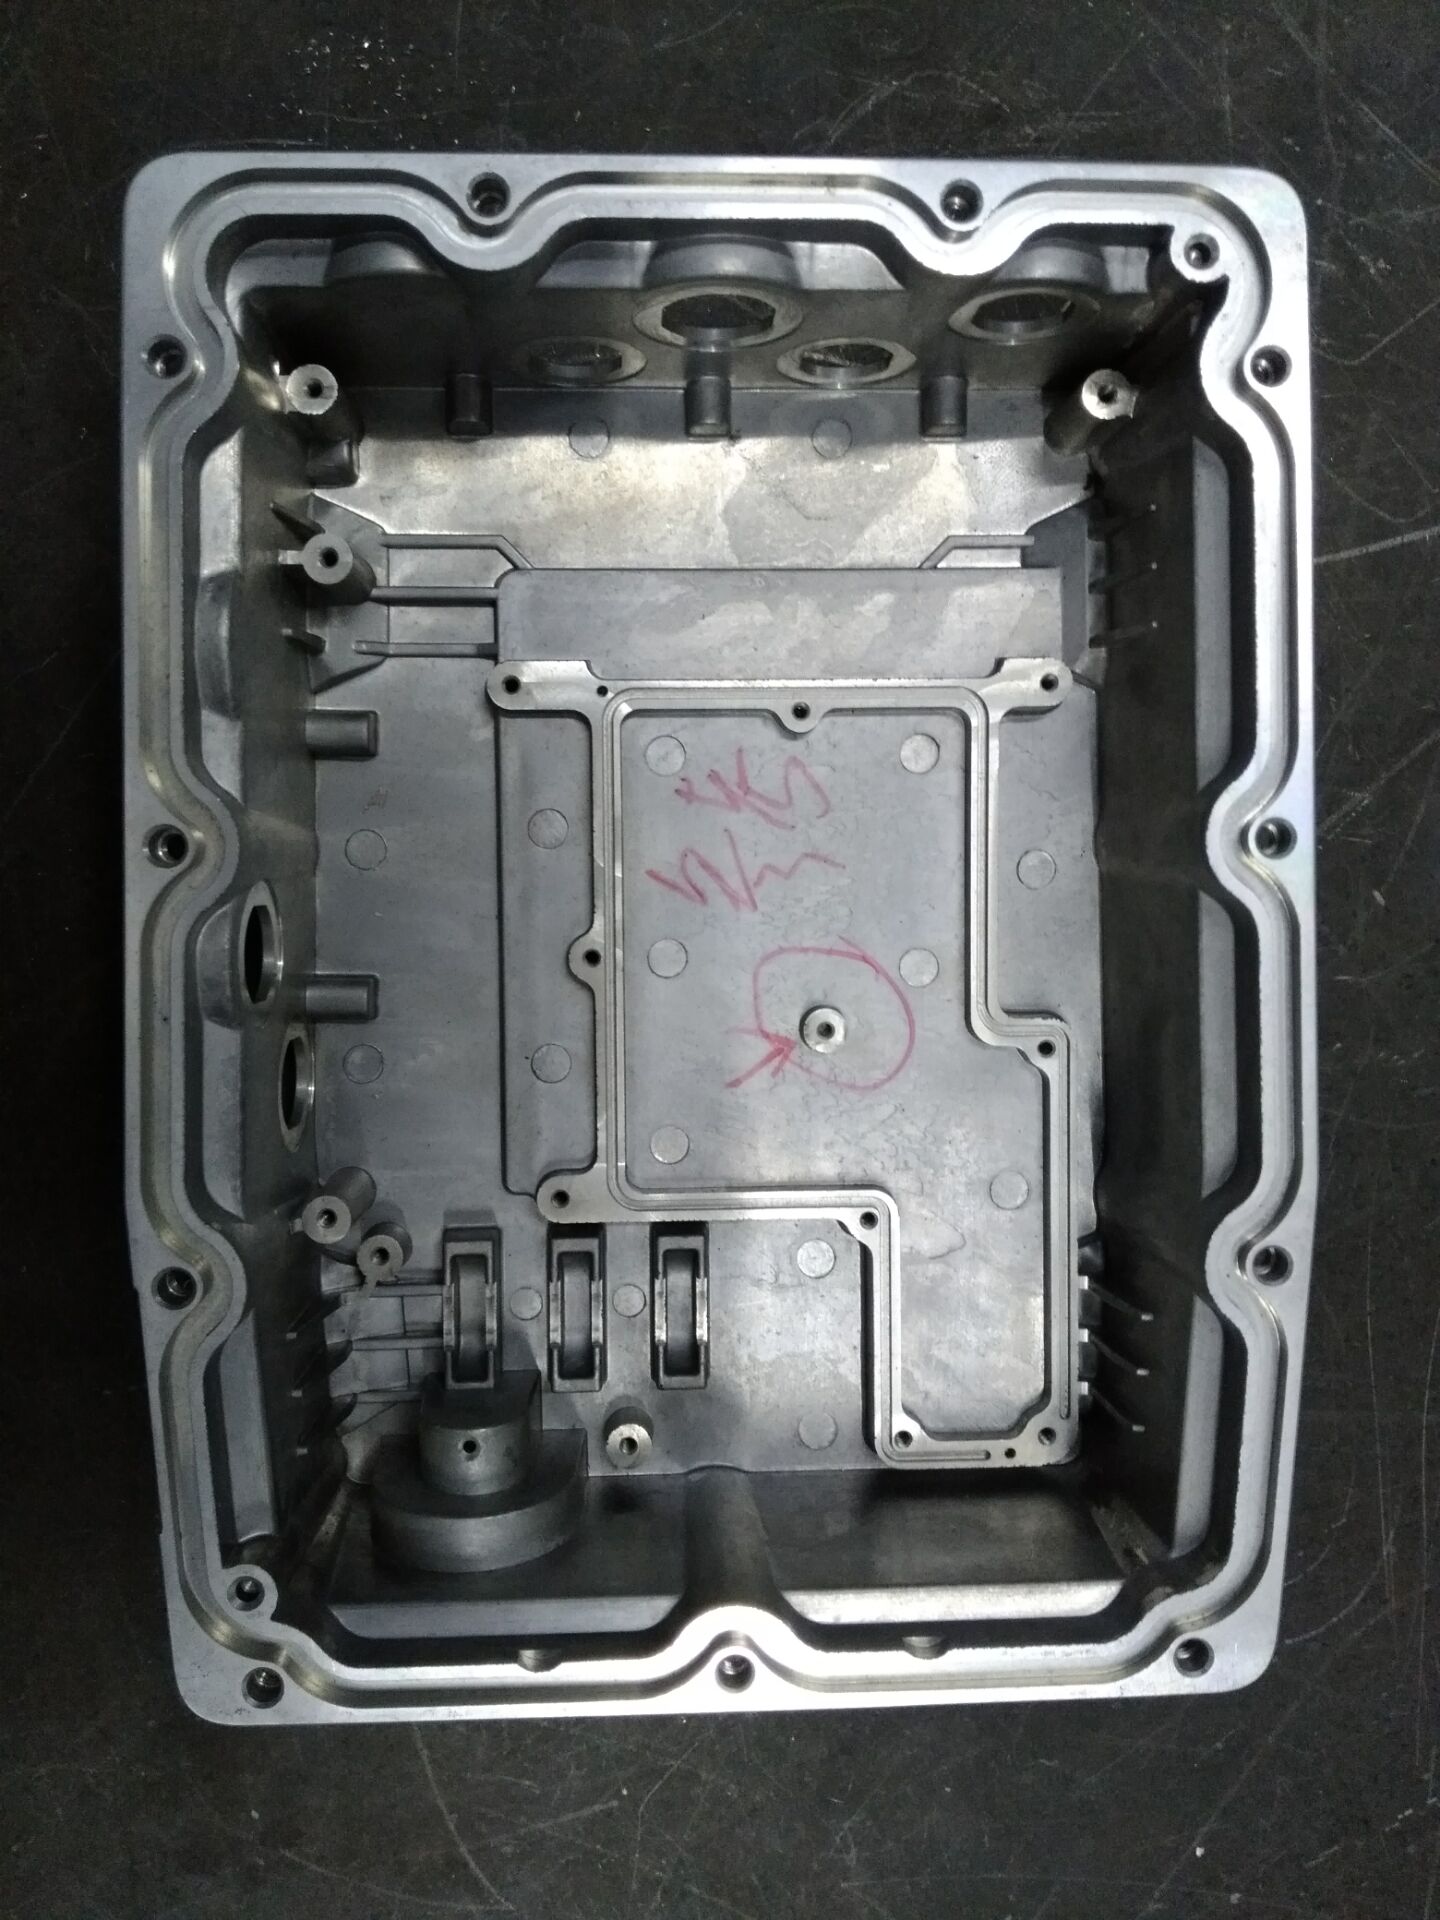 As a lkm mold base plastic injection mold company,what is the process of creating a mold?